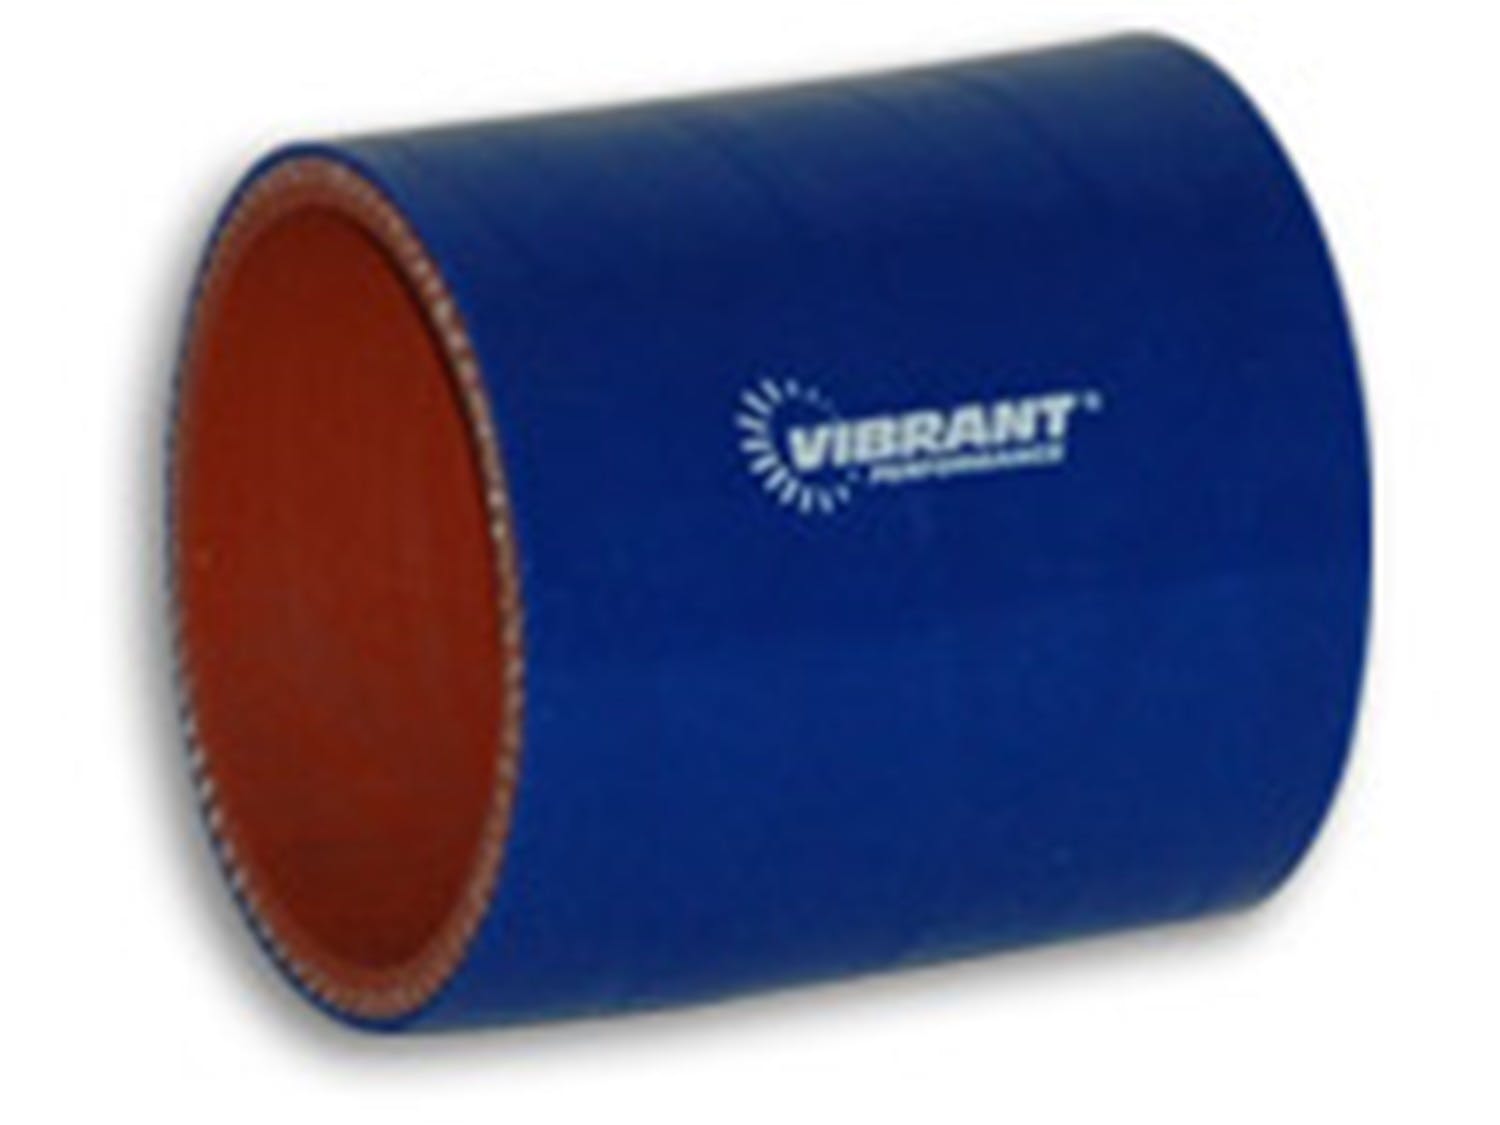 Vibrant Performance 2704B 4 Ply Silicone Sleeve, 1.75 inch I.D. x 3 inch Long - Blue